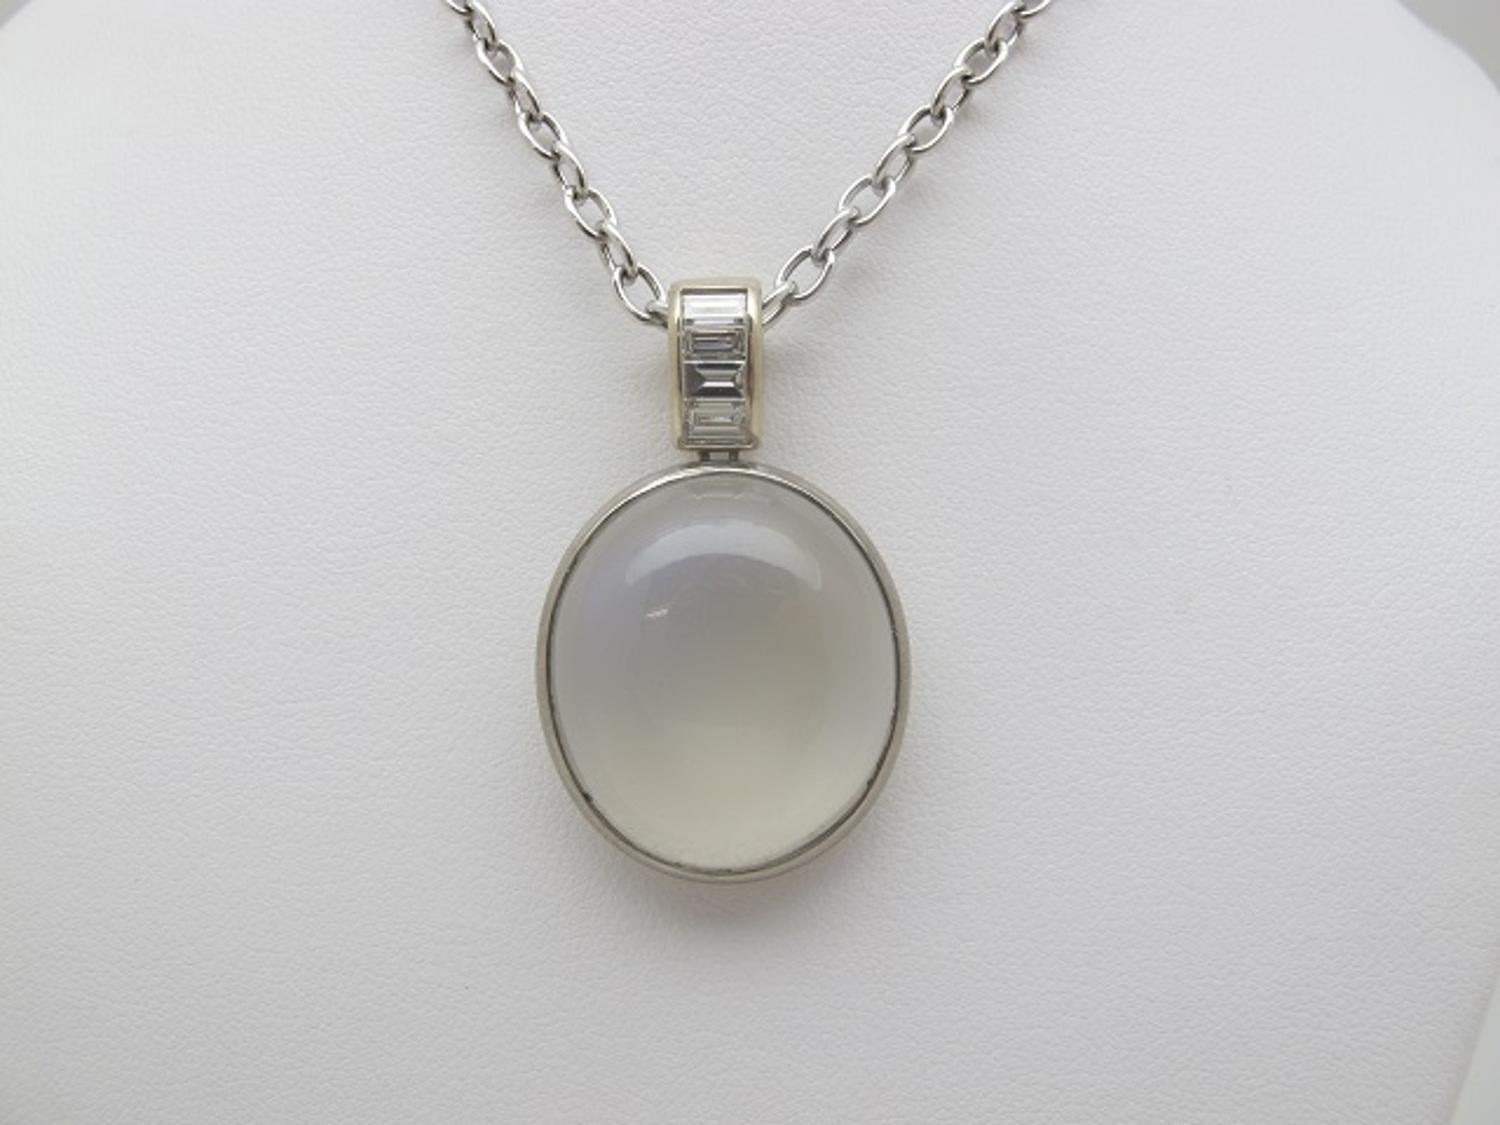 Cabochon 29.72 Carat Oval Moonstone and Diamond 18k White Gold Pendant Necklace